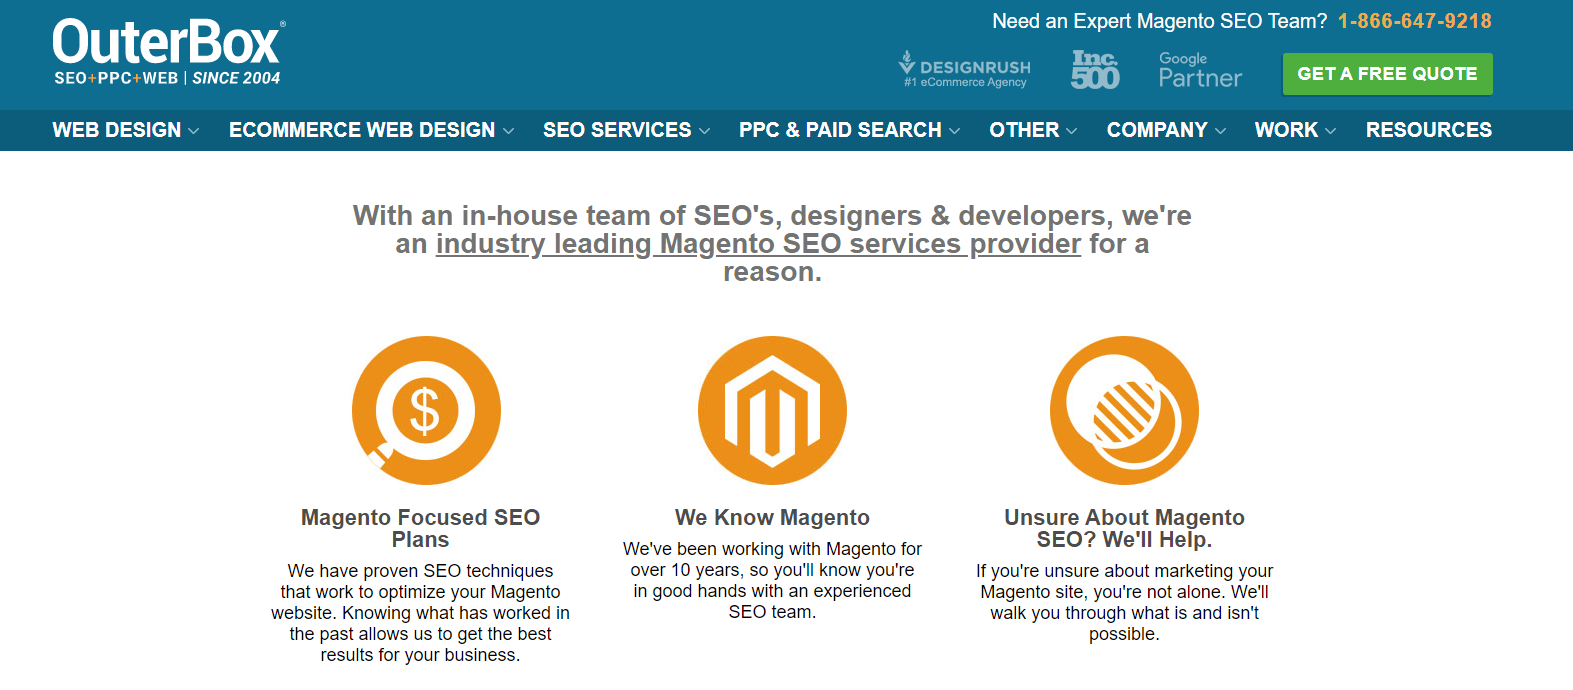 Magento SEO services by OuterBox